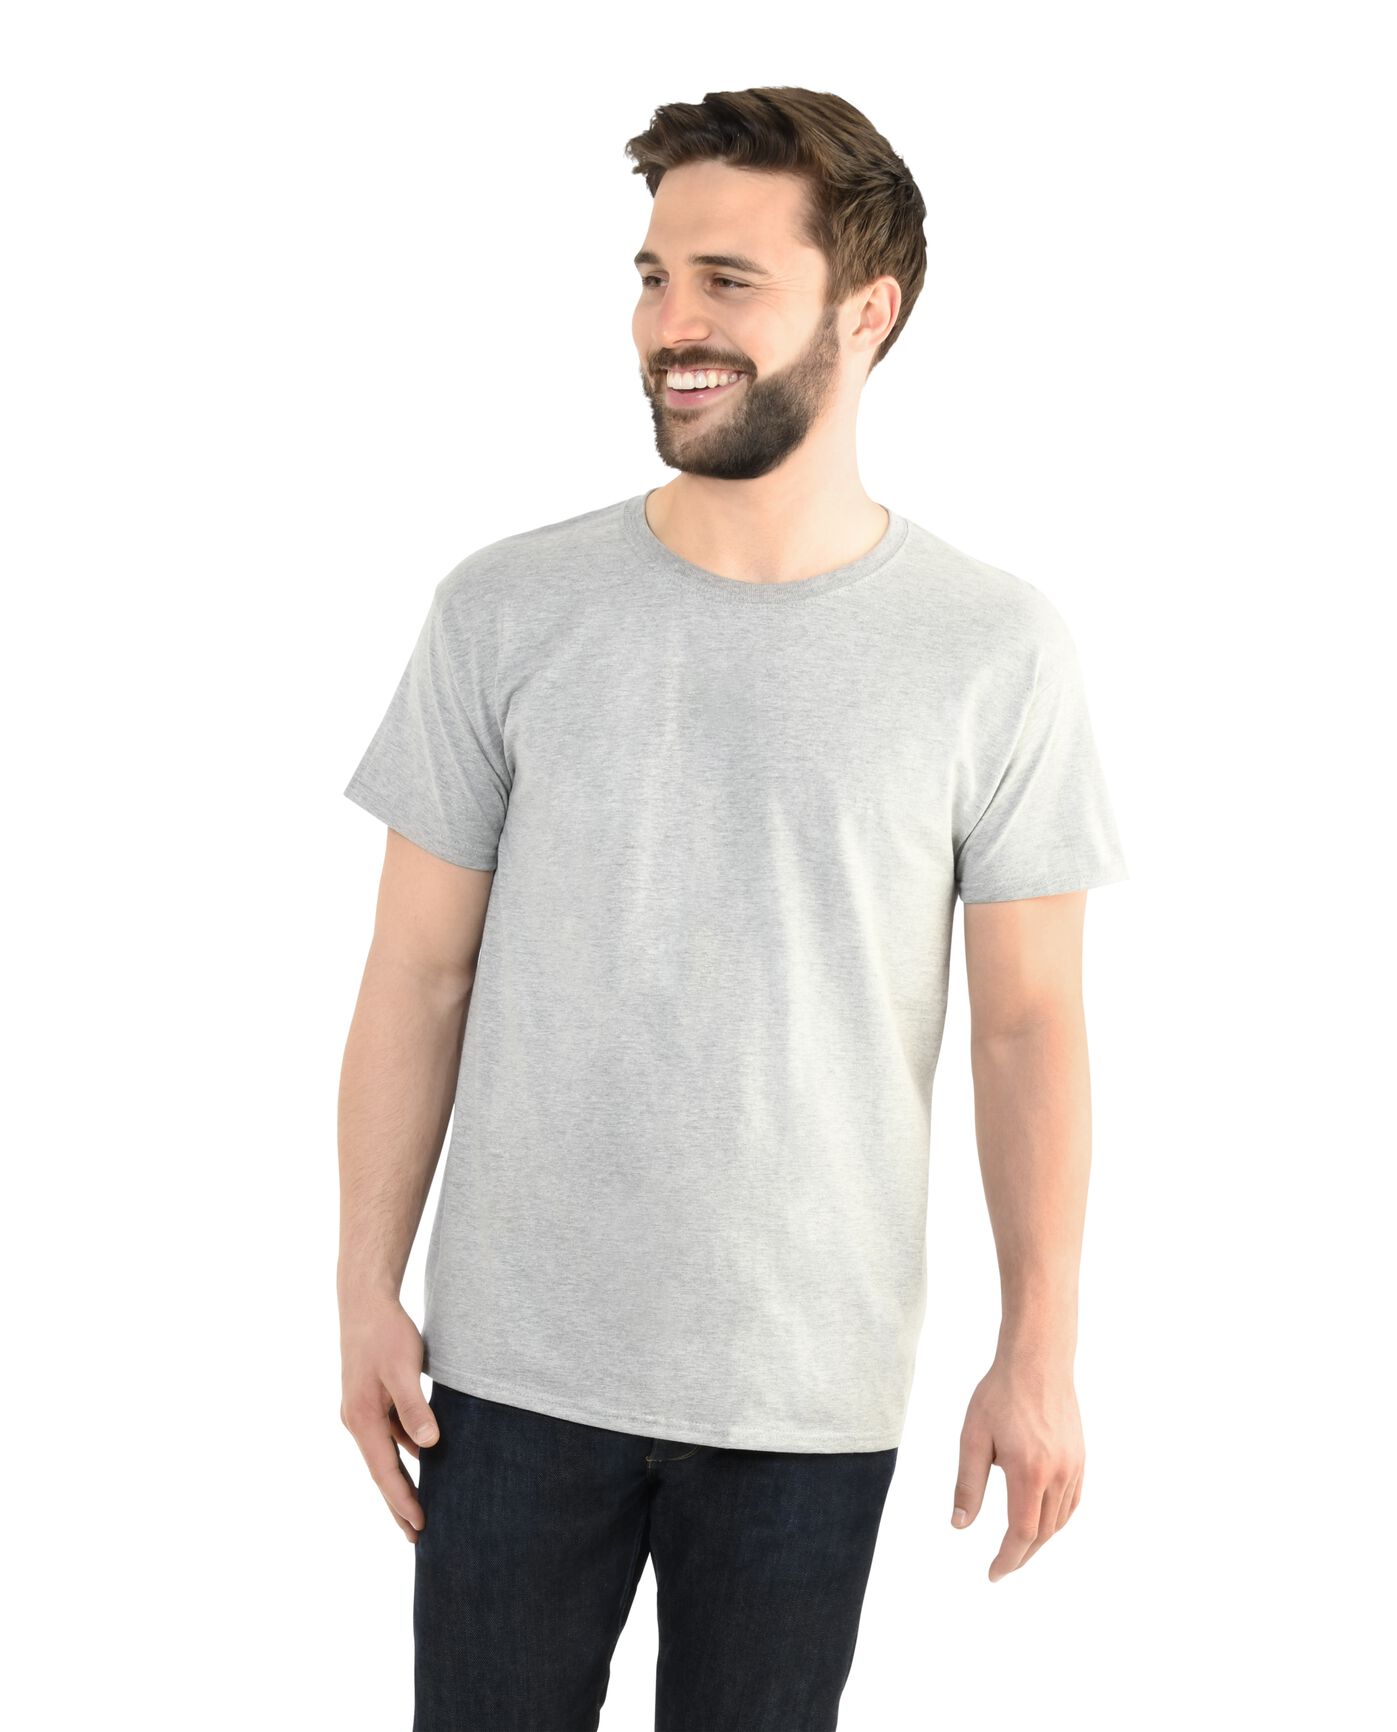 PLAIN WHITE  USA T-SHIRT-UNFORGETTABLE GIFT- AMERICAN T-SHIRT -TOP QUALITY-LOWEST PRICE GAURANTEED-DO NOT MISS THIS CHANCE-FREE HOME(POST OFFICE) DELIVERY-ART NO. 61036-REA 27%